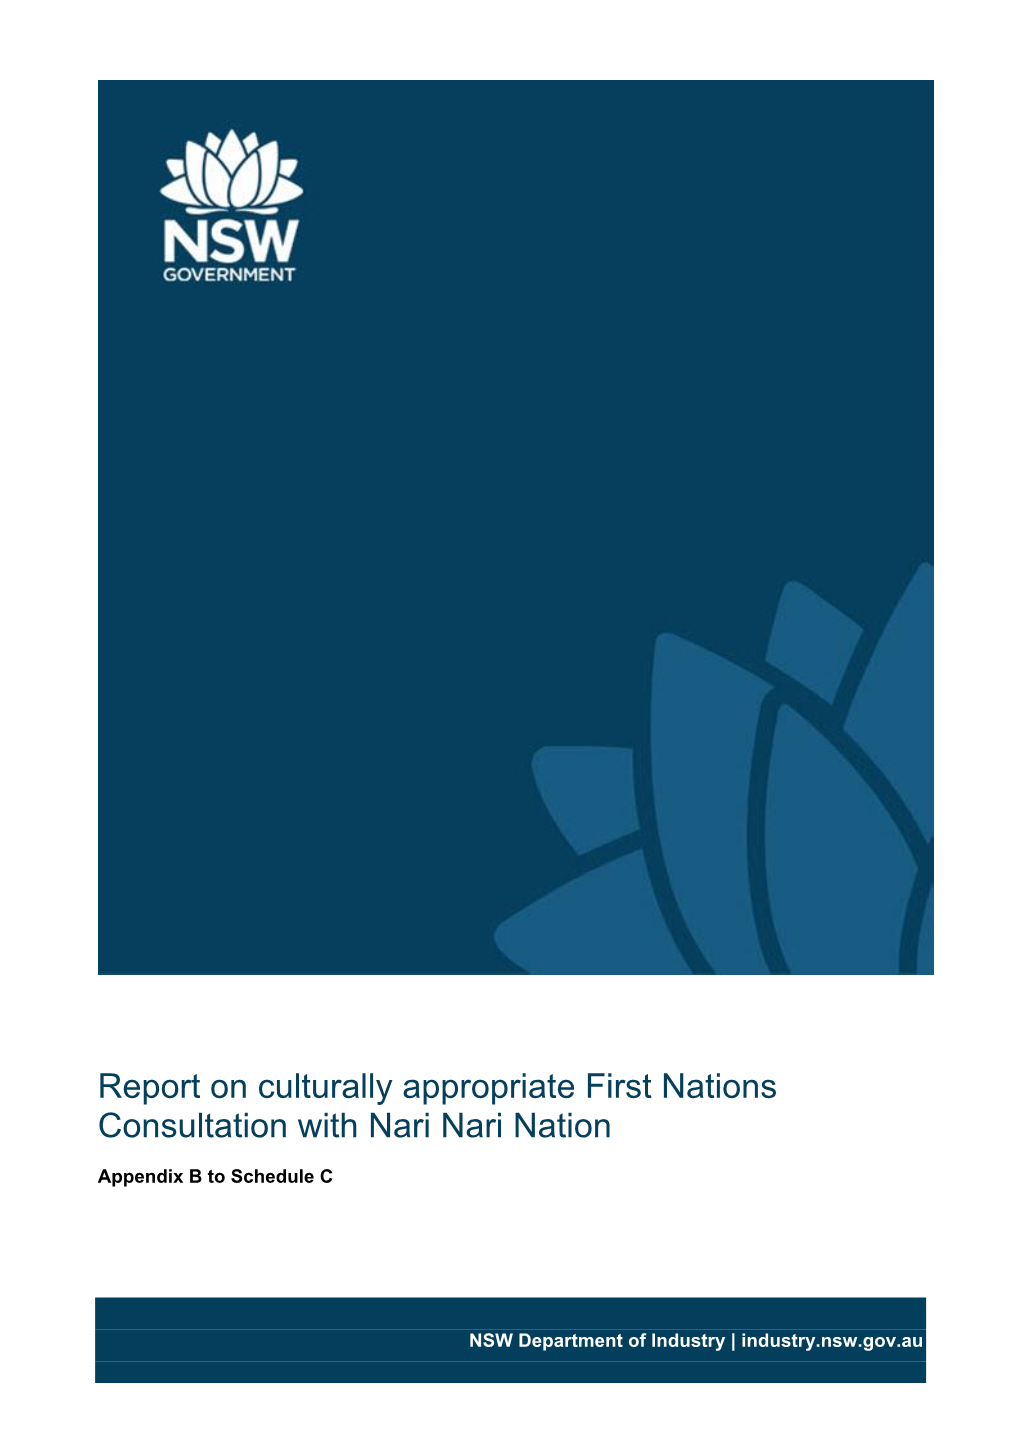 Report on Culturally Appropriate First Nations Consultation with Nari Nari Nation